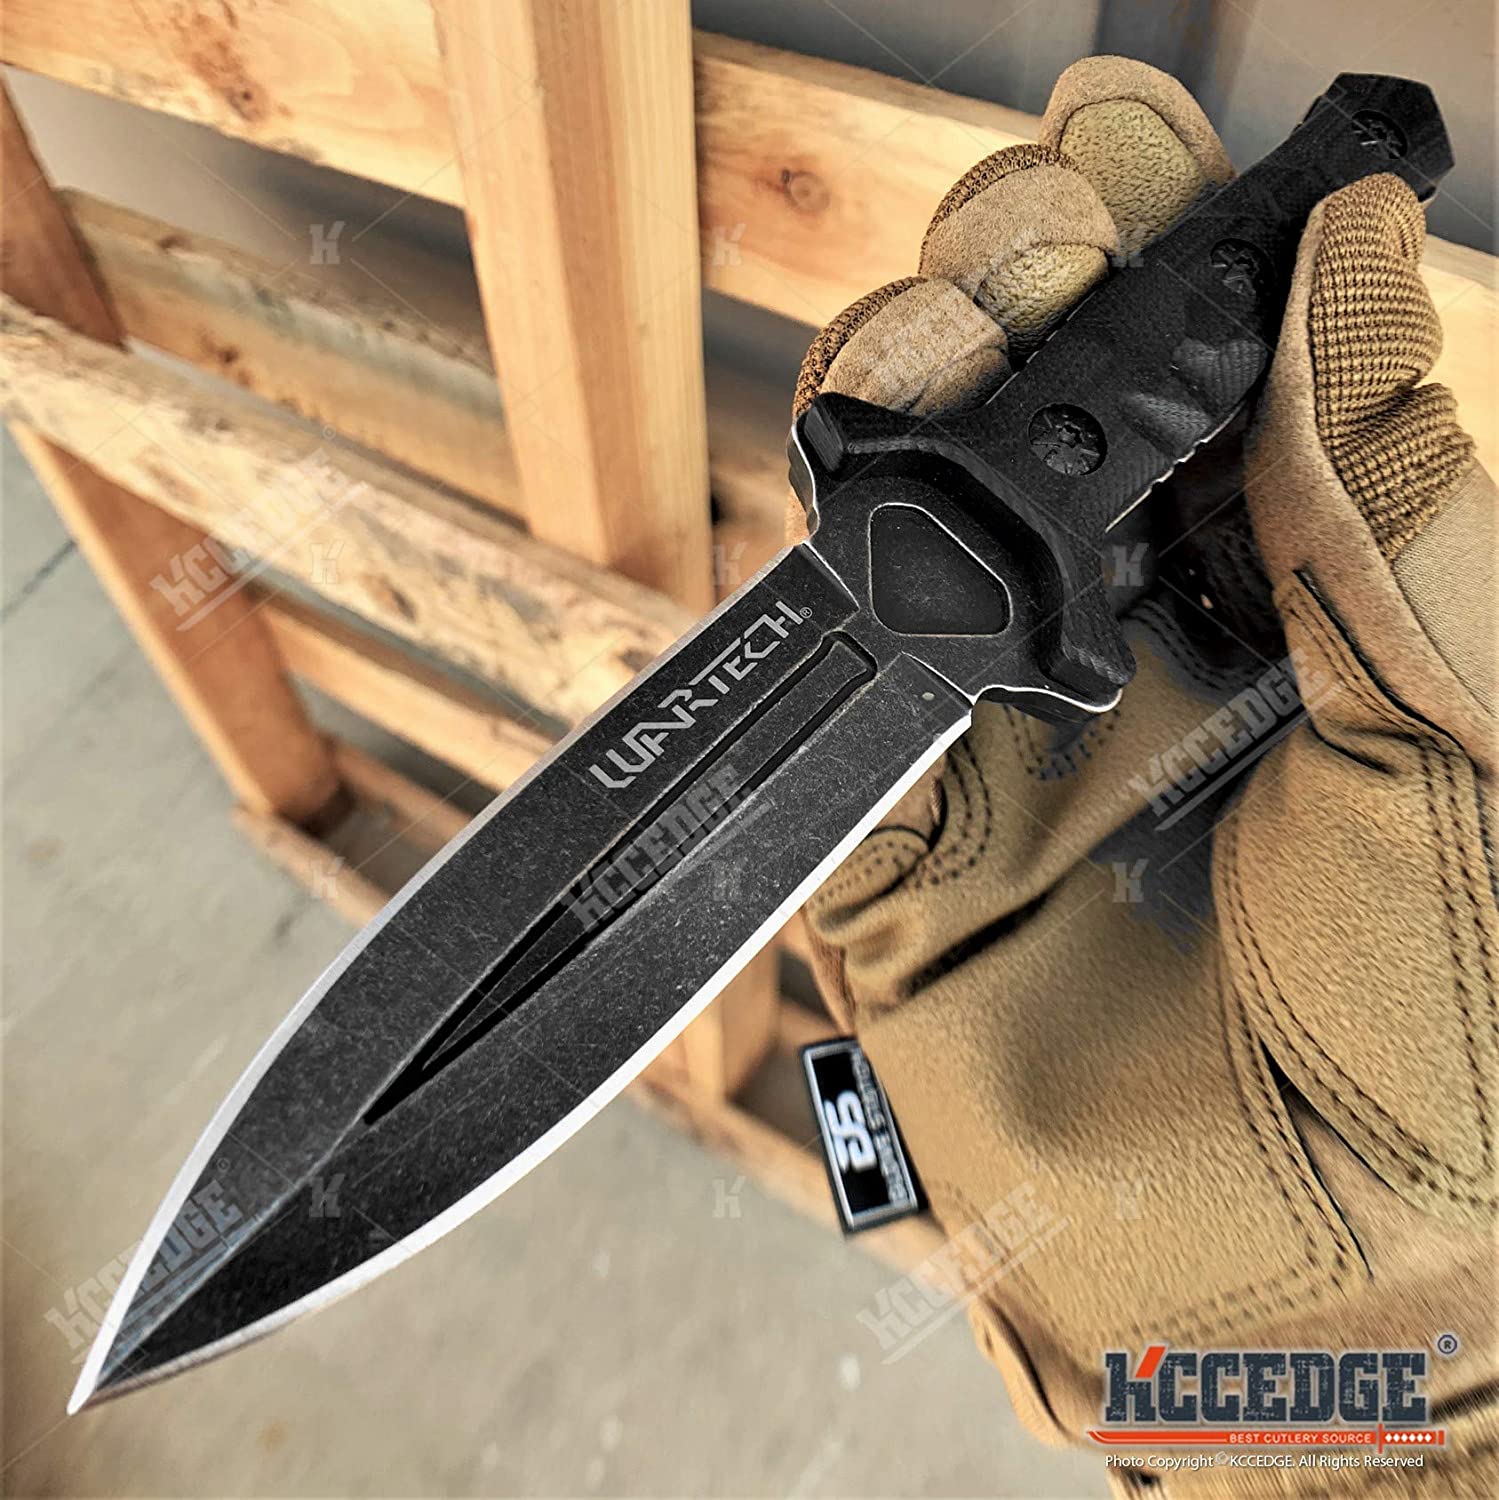 Hunting Knife Tactical Knife Survival Knife 8" Fixed Blade Knife G10 Handle Scales w/ Molle Compatible Kydex Pressure Retention Sheath Camping Accessories Survival Kit Survival Gear 79965